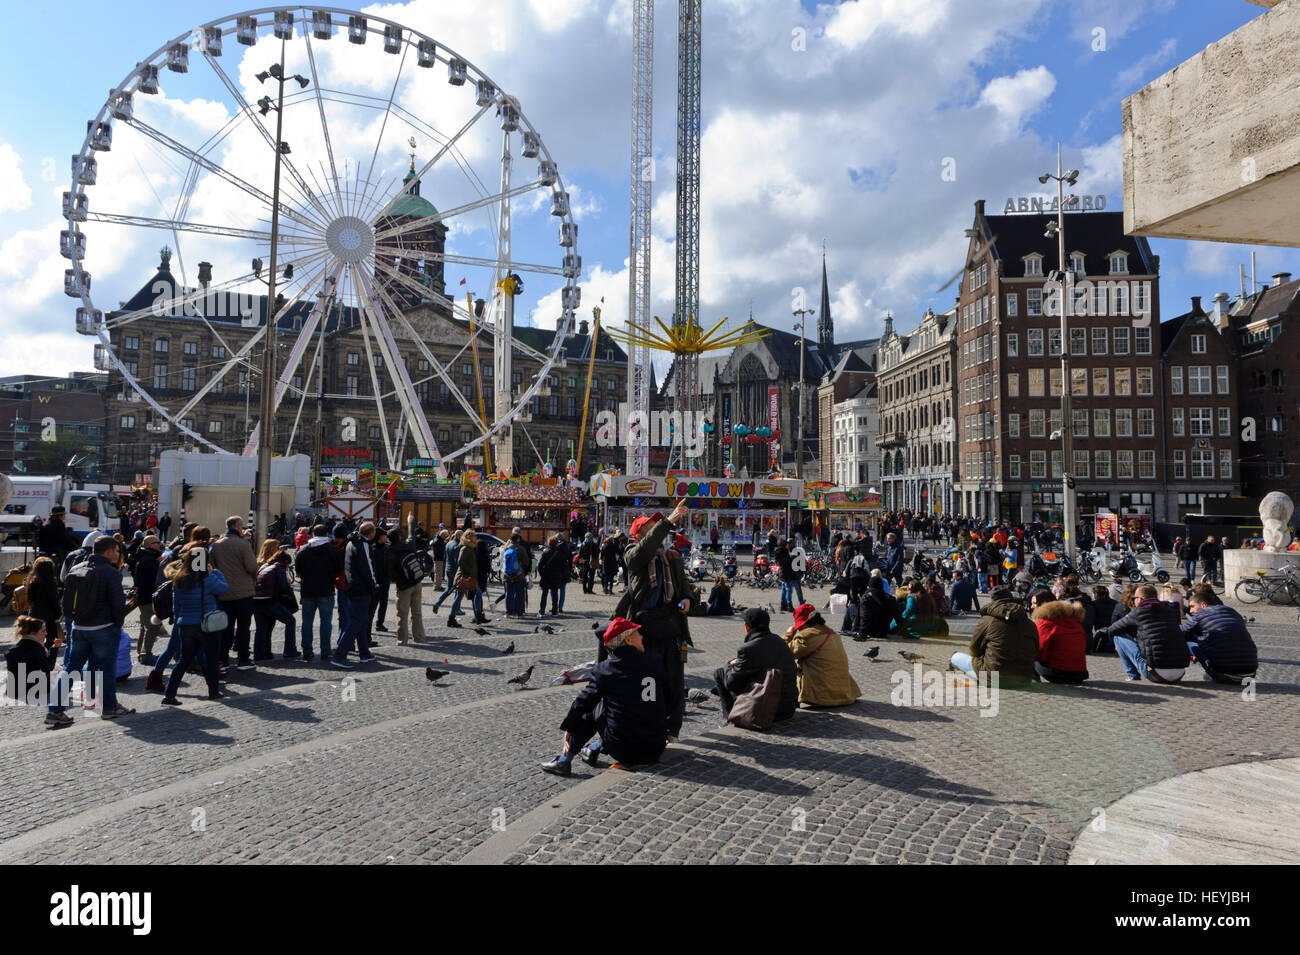 People gathered at a fun fair in Dam Square in Amsterdam, Holland, Netherlands. Stock Photo